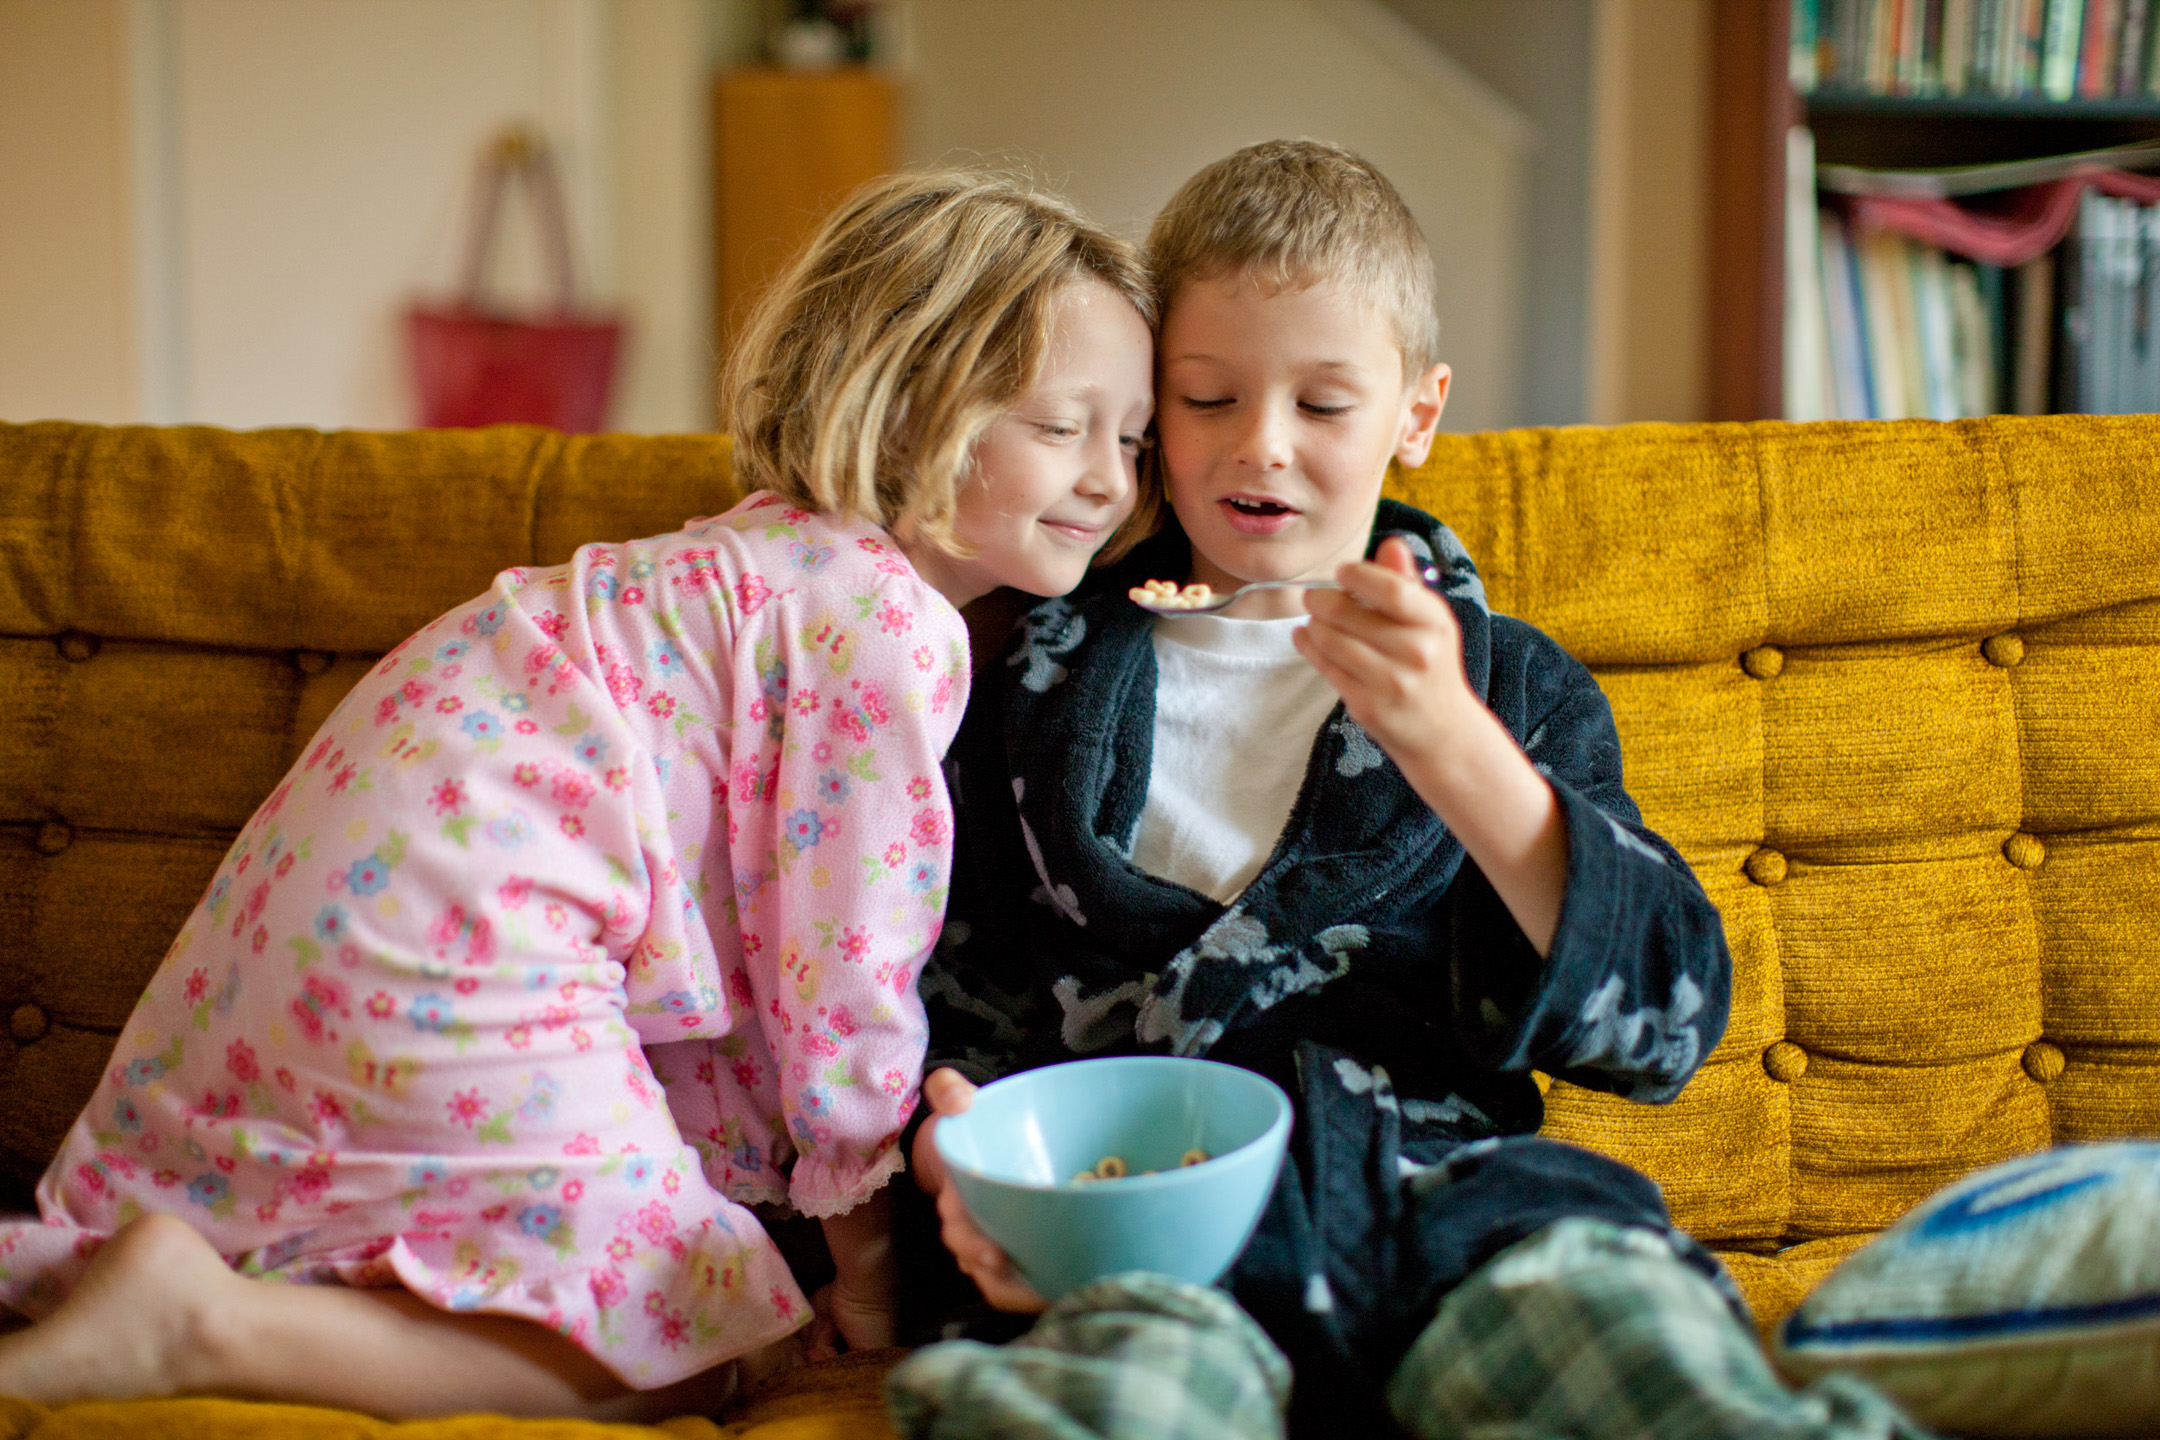 A boy and his sister eat cereal and milk together while sitting on a sofa